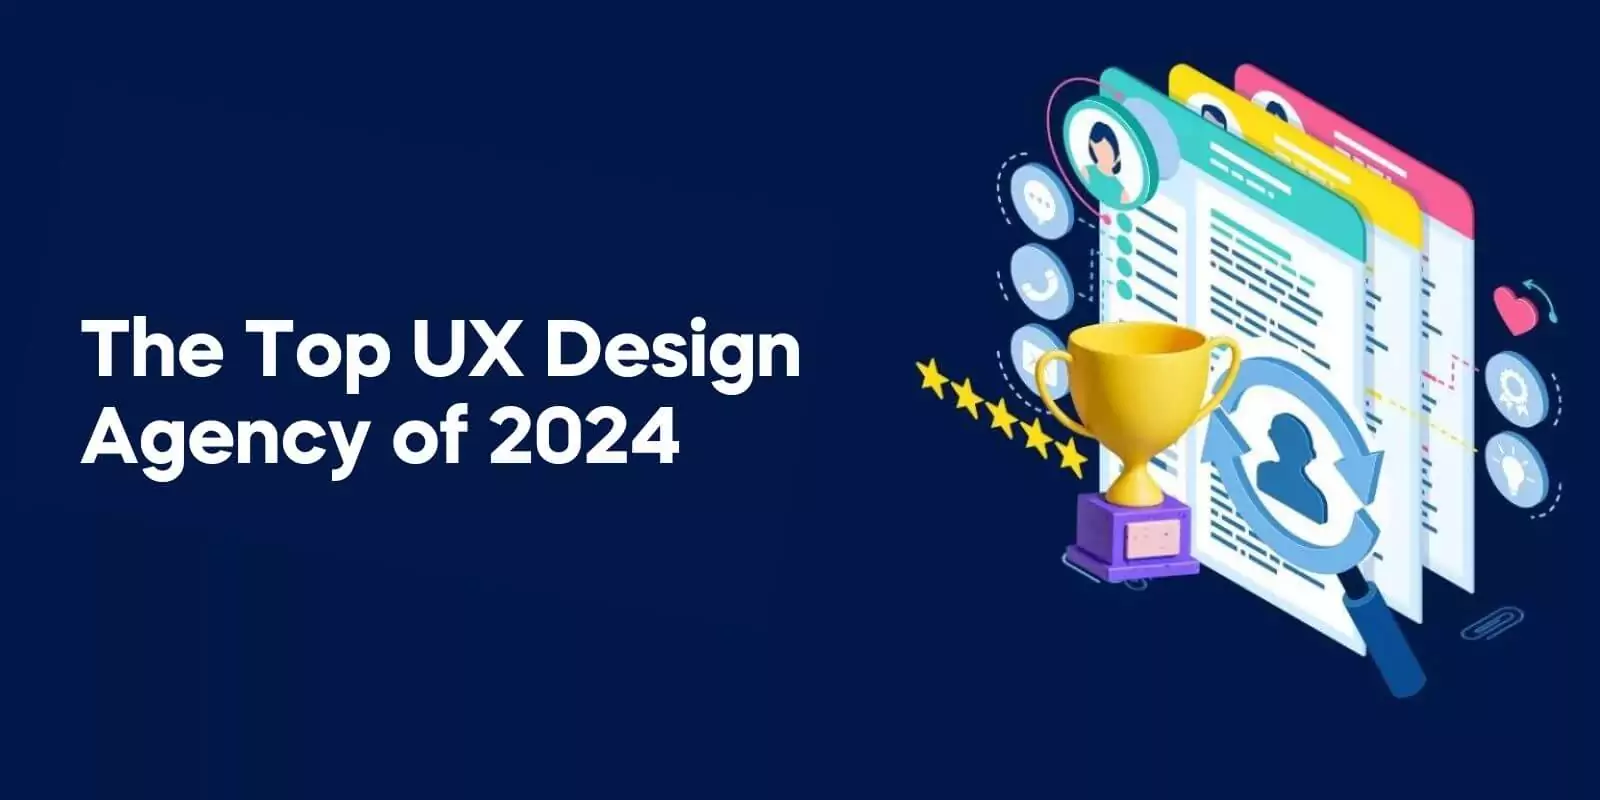 The Top UX Design Agency of 2024